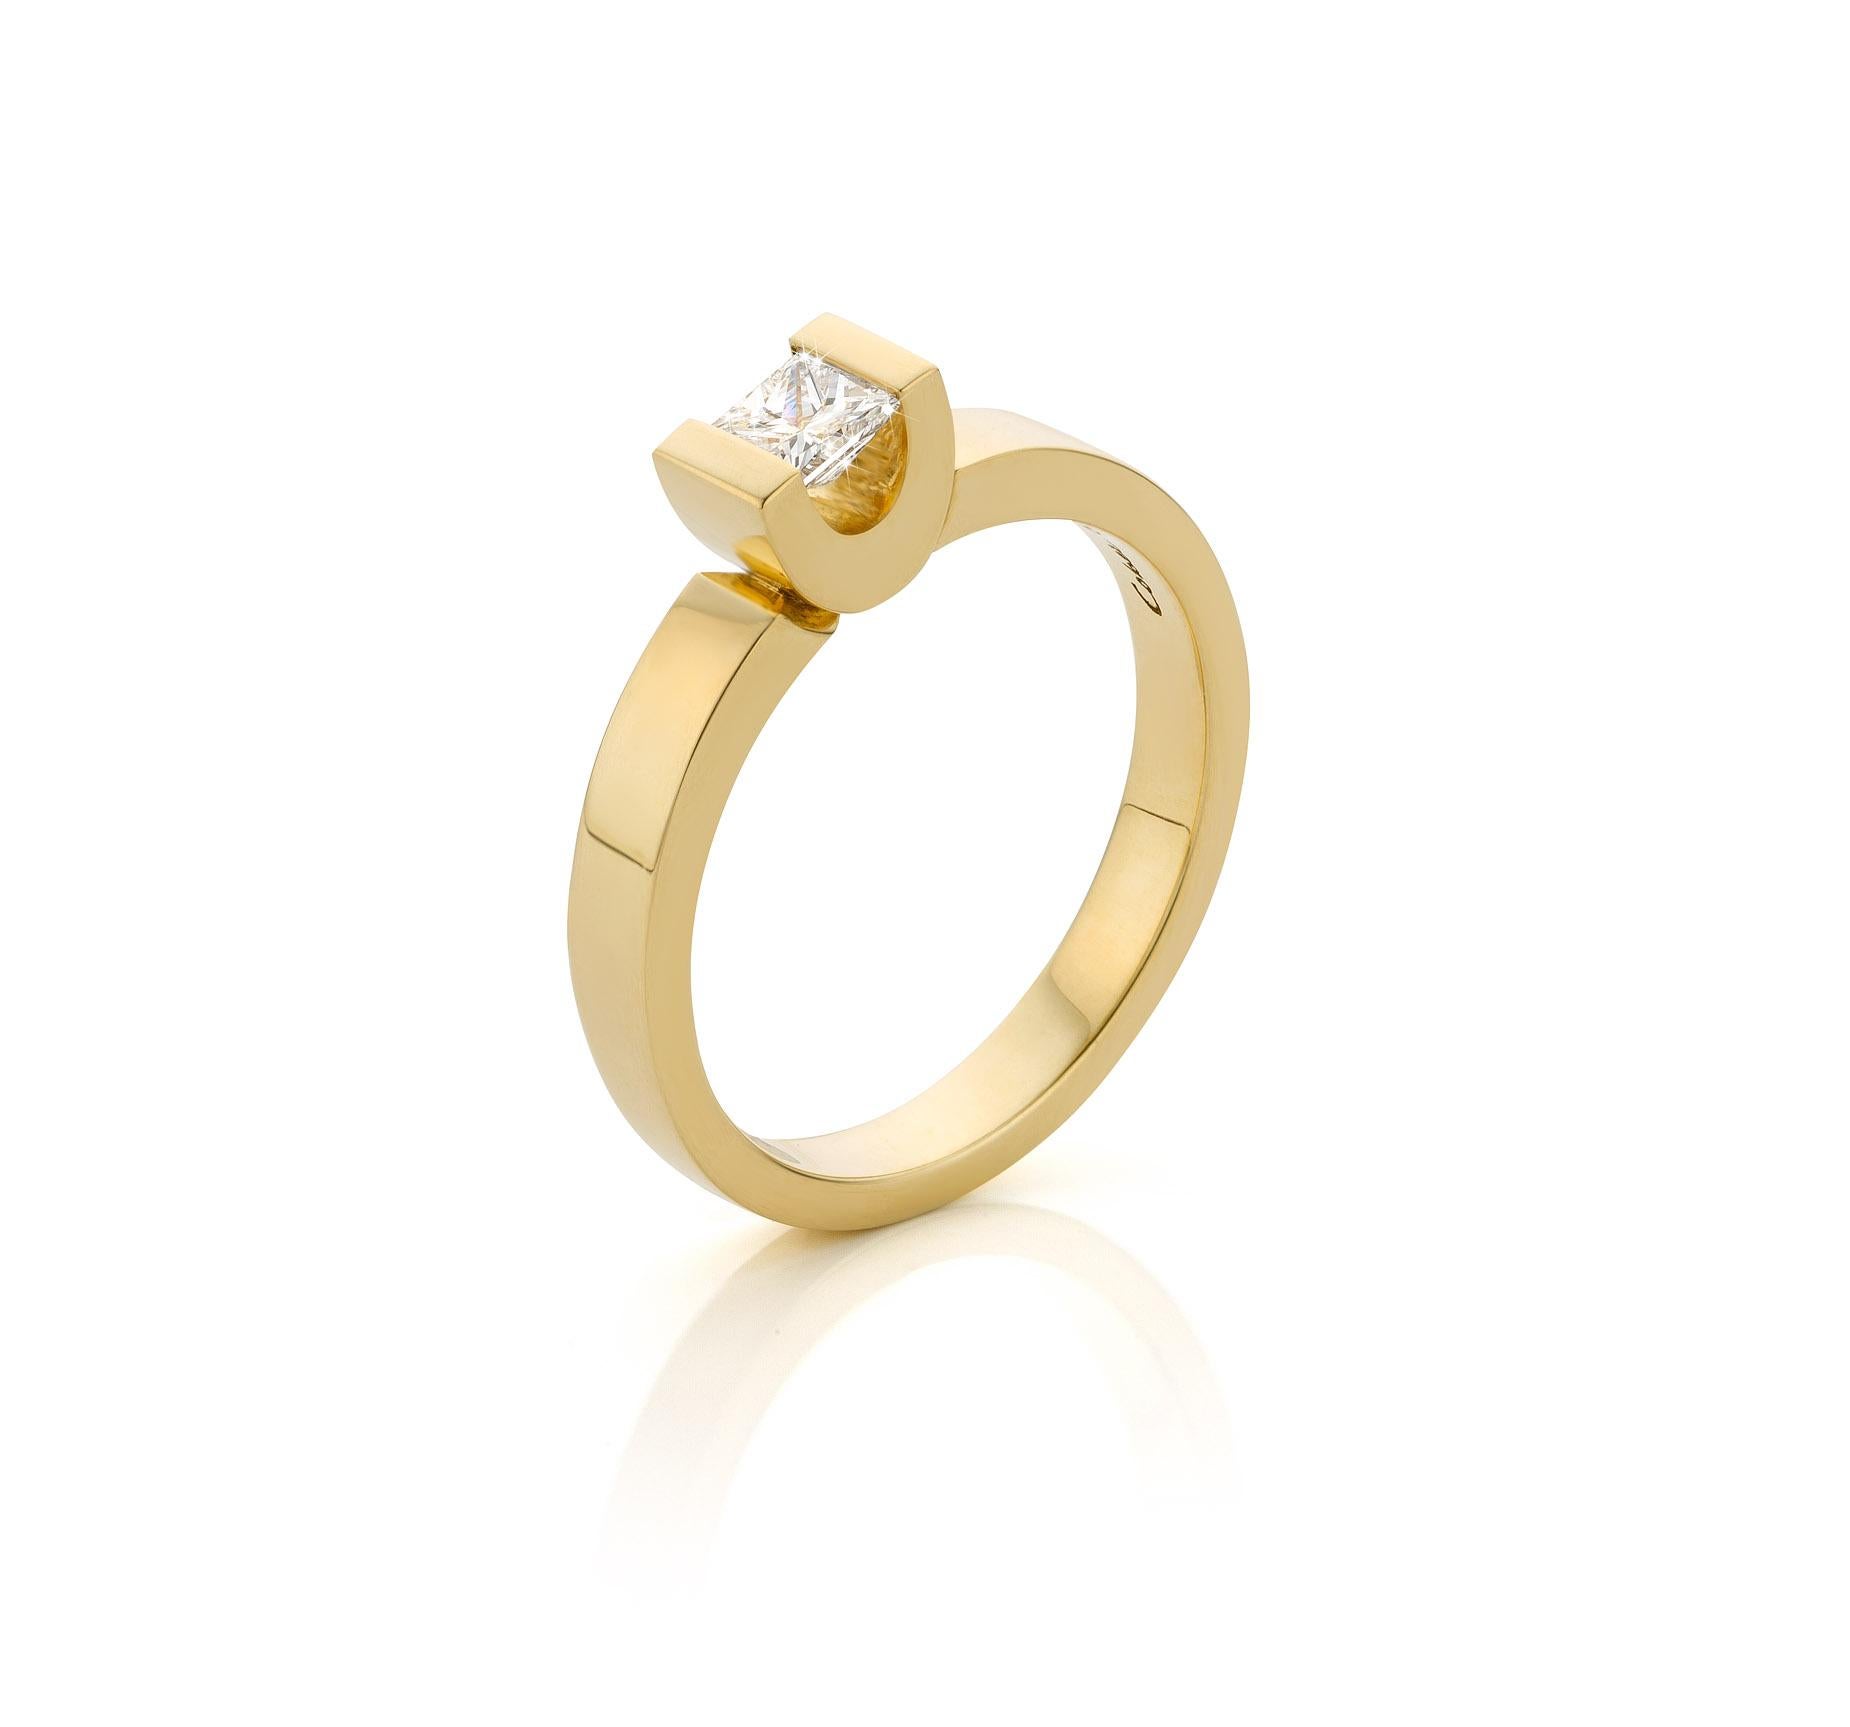 For Sale:  Cober Jewellery with Princess Cut Diamond Modern Engagement Ring Total Handmade 4